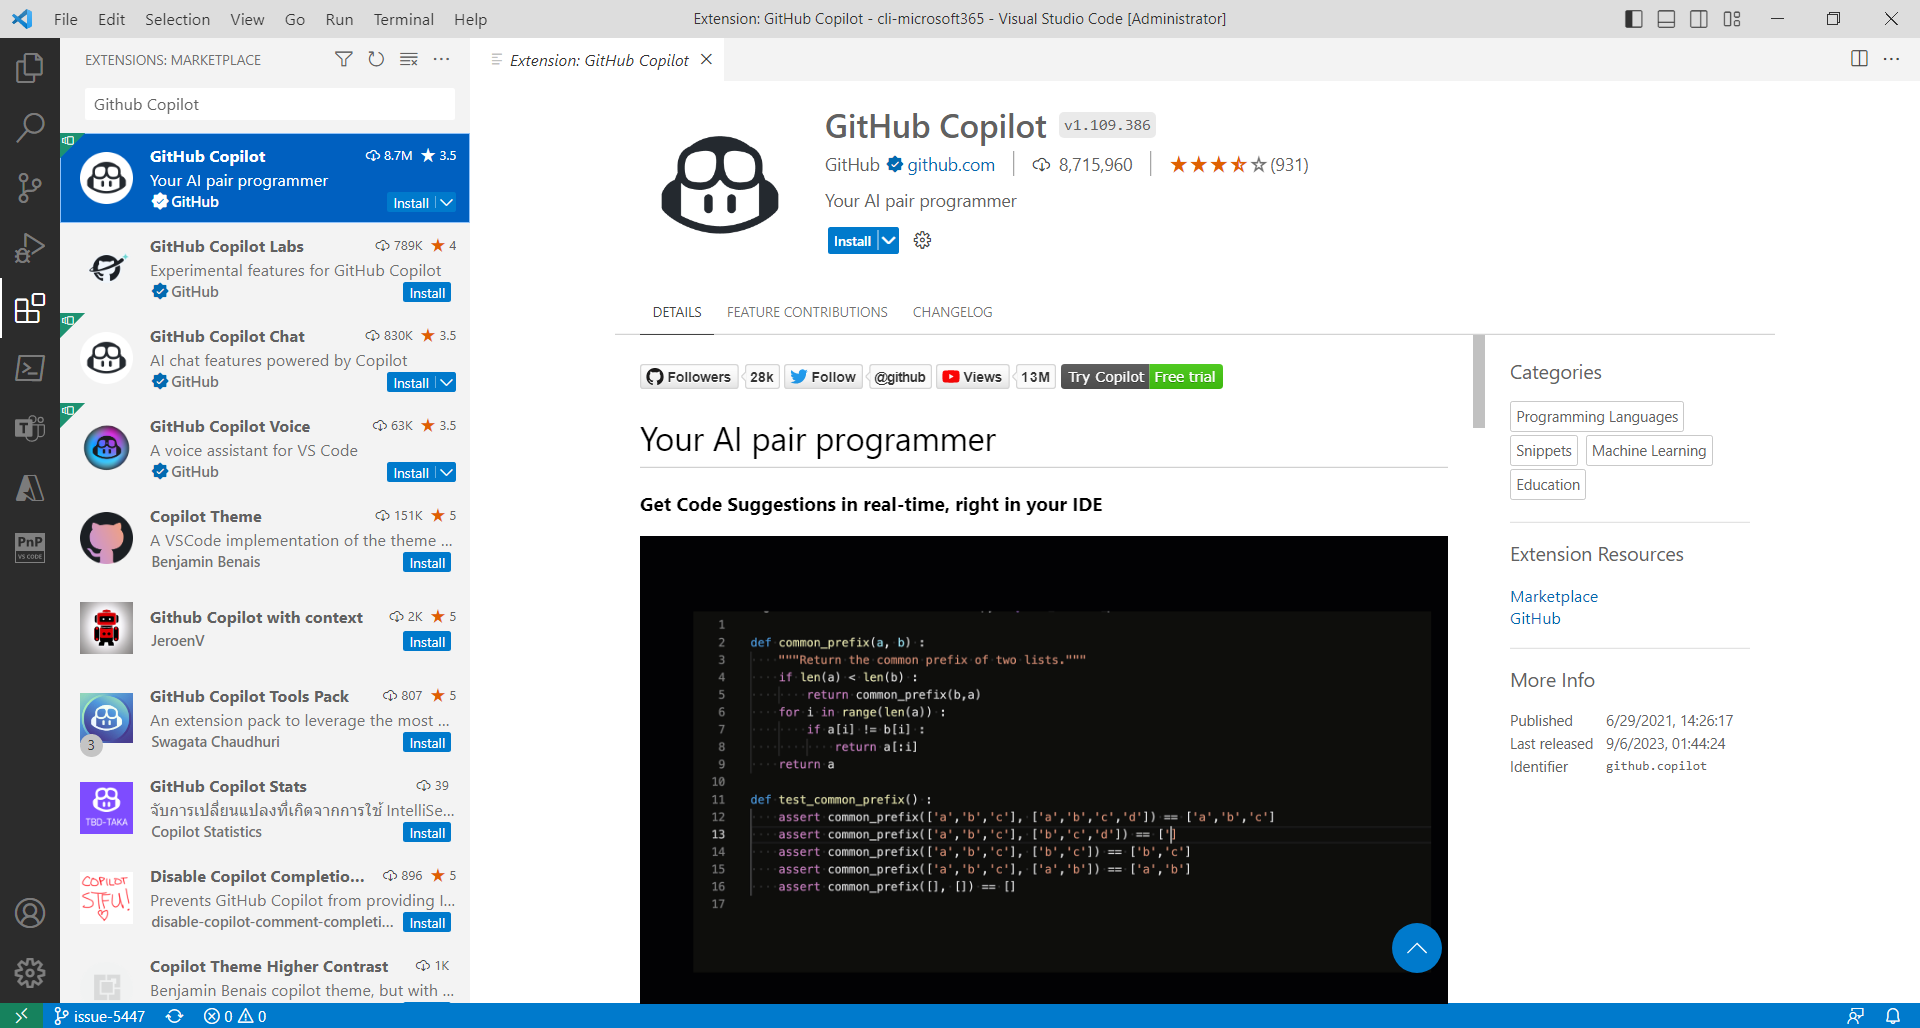 Getting started with GitHub Copilot